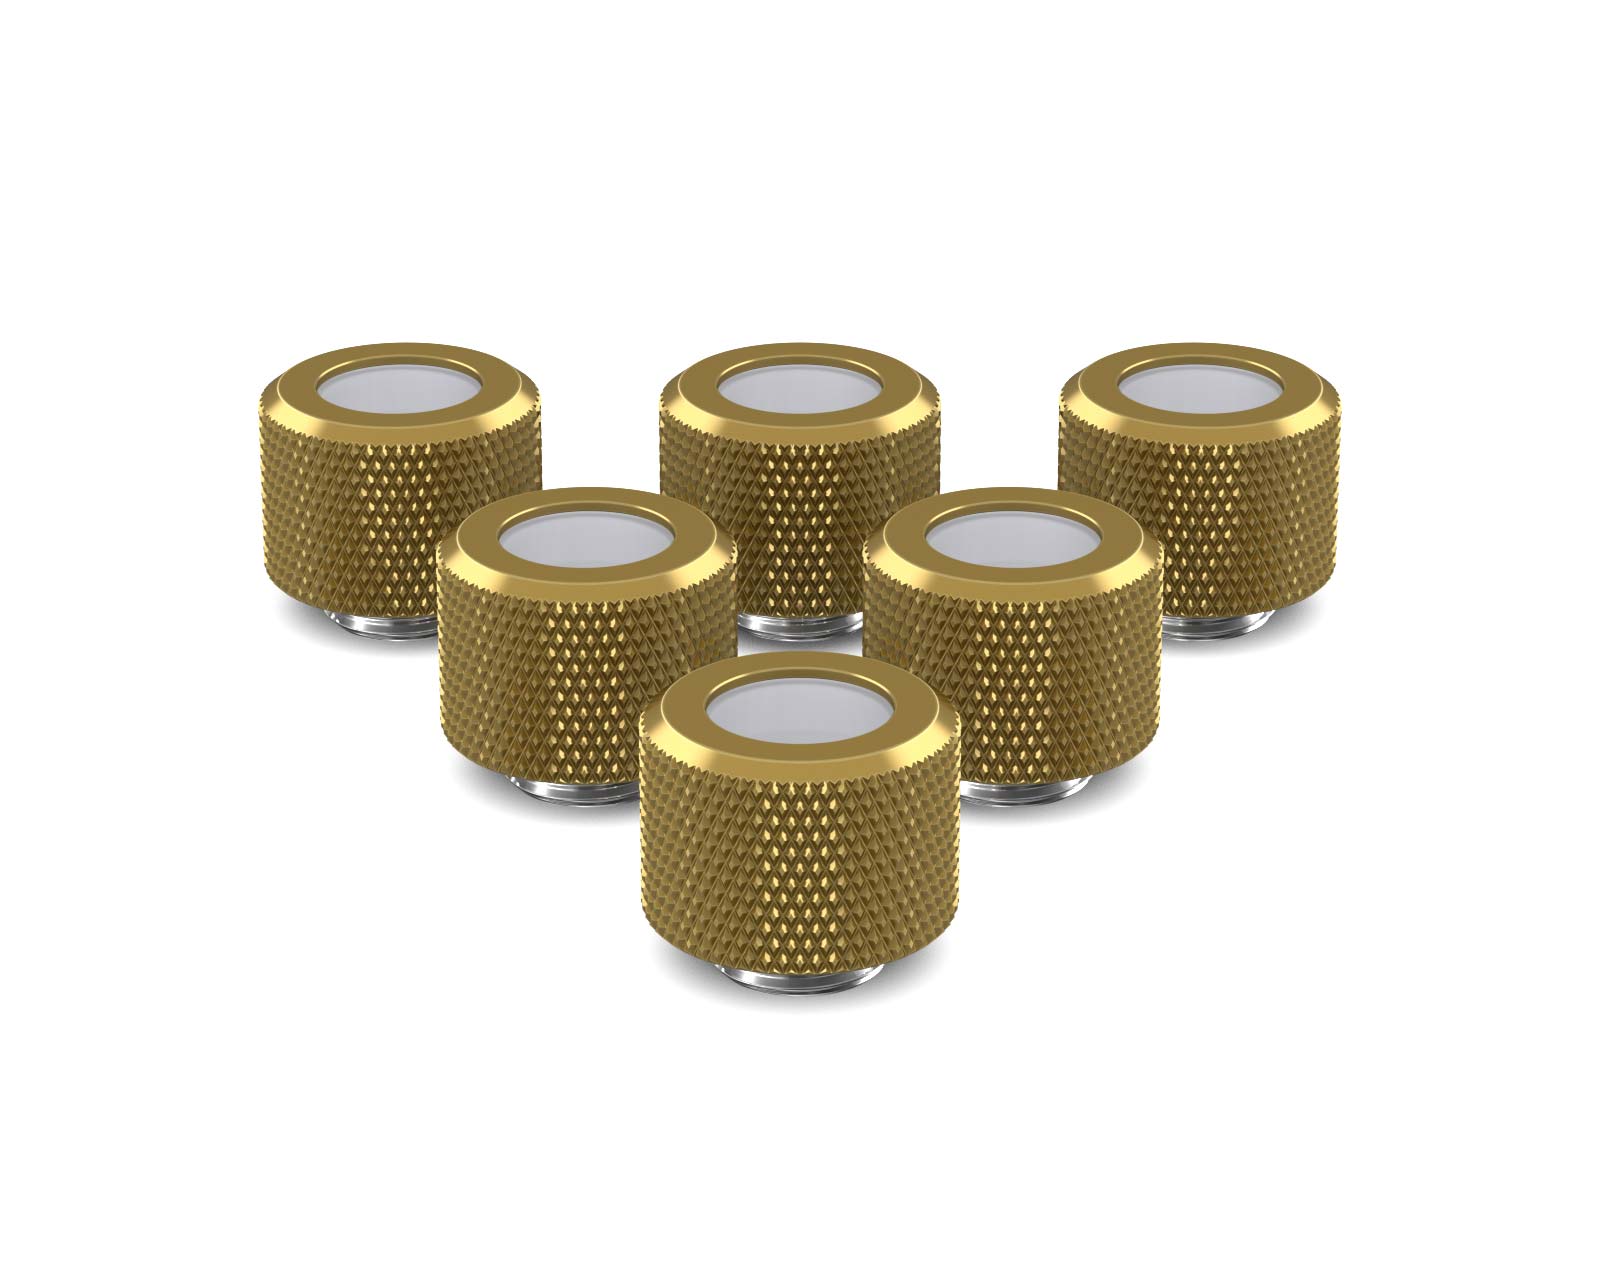 PrimoChill 12mm OD Rigid SX Fitting - 6 Pack - PrimoChill - KEEPING IT COOL Candy Gold